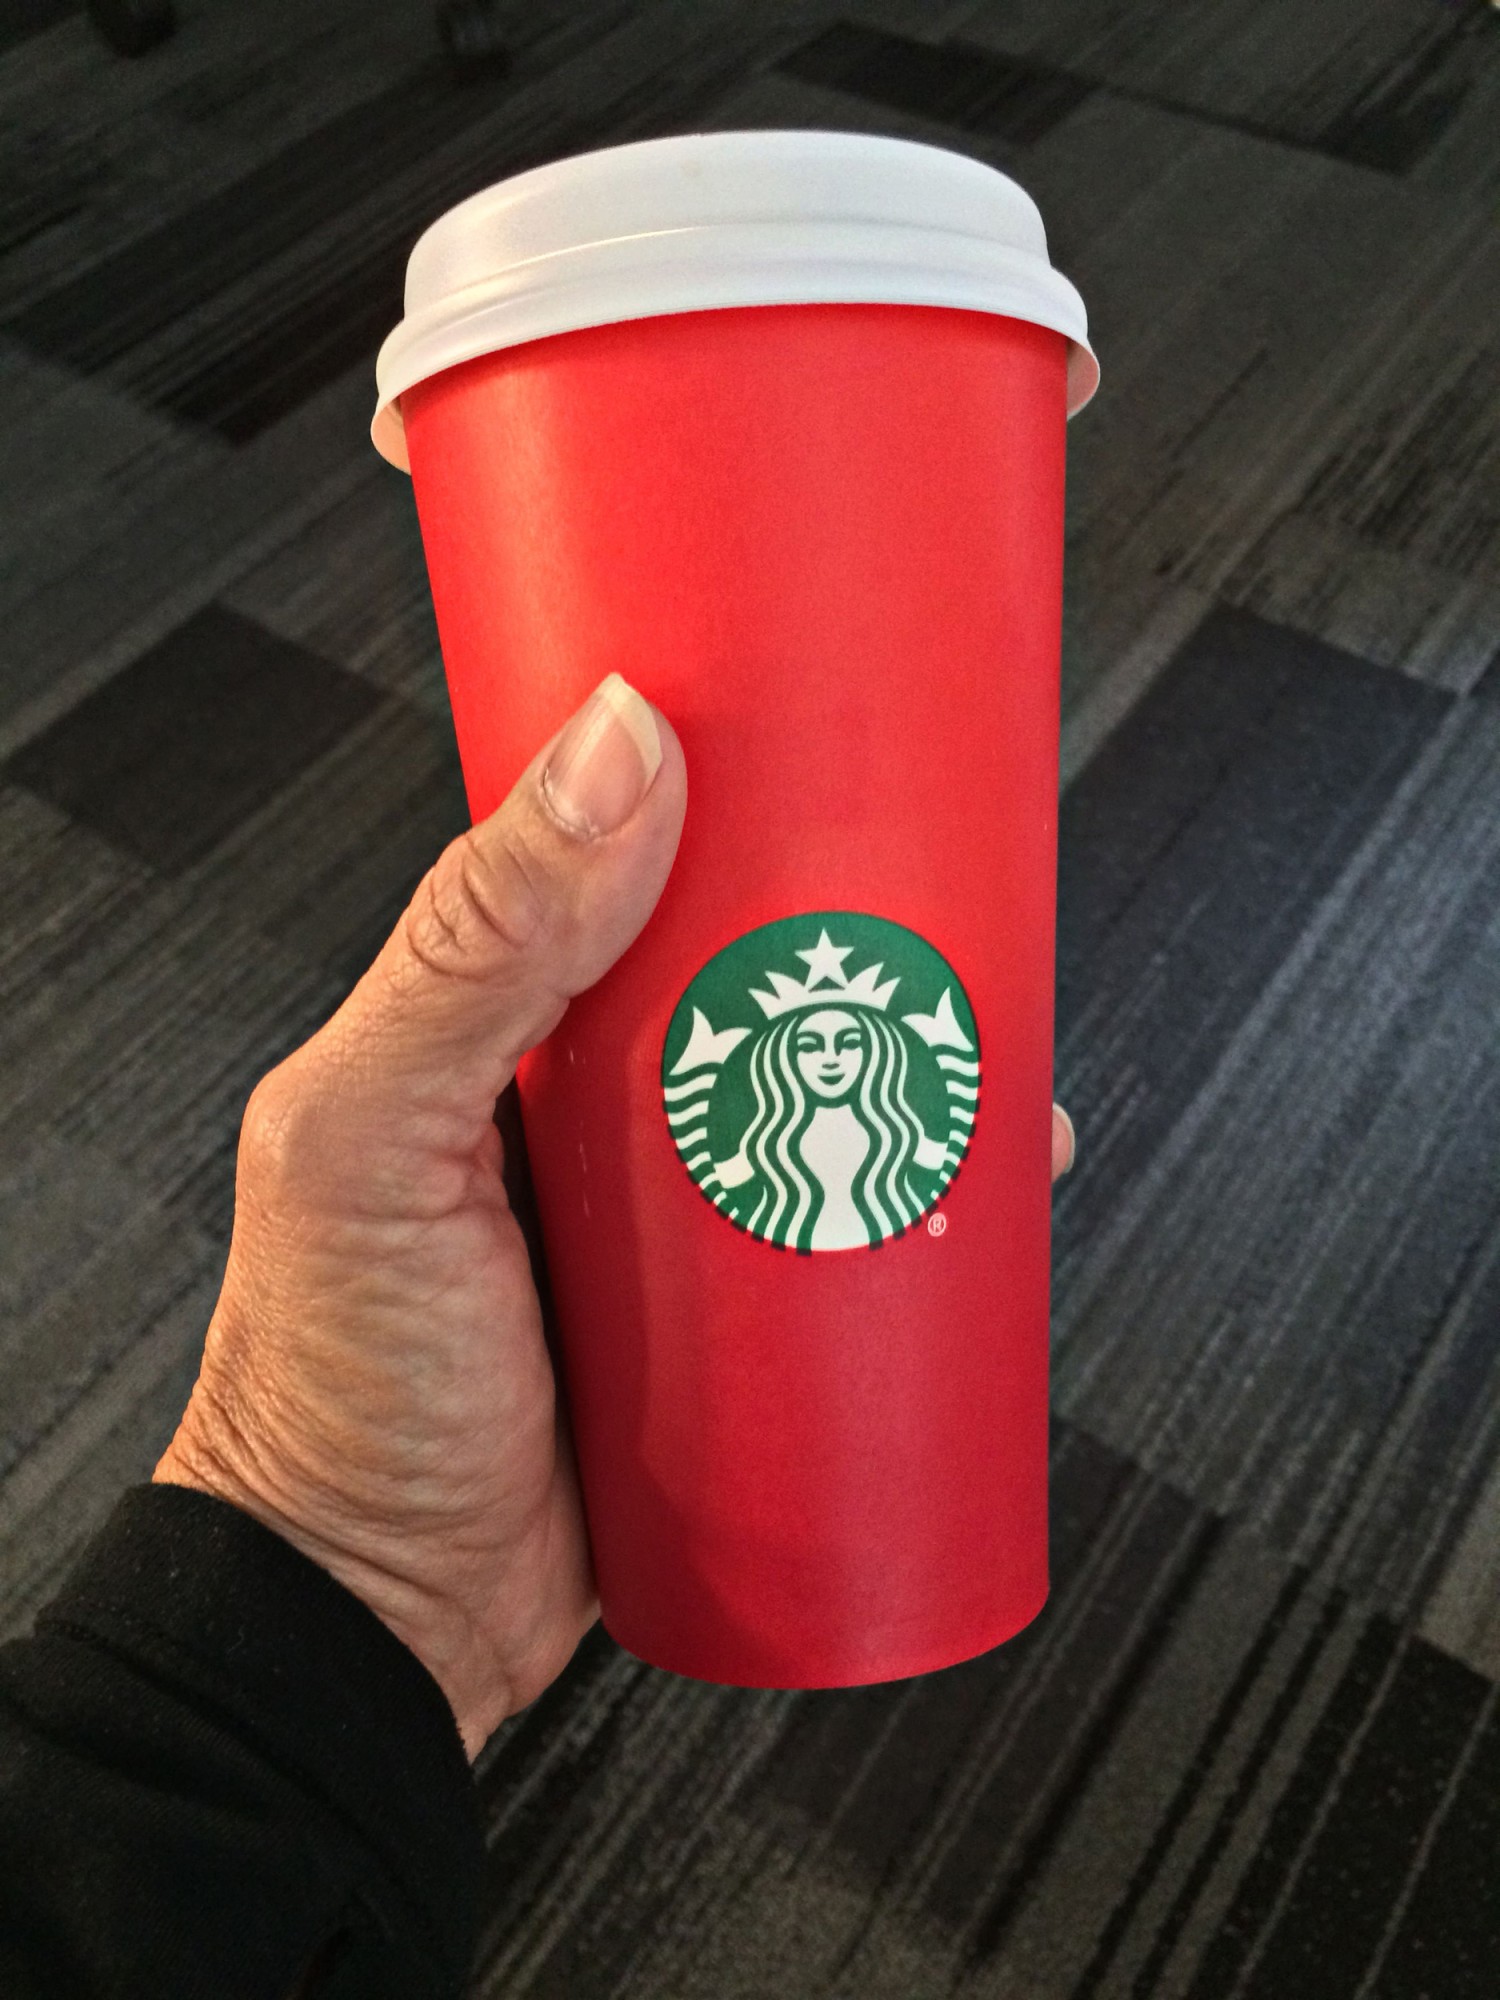 Starbucks Red Cup Day is back. Here's how to get your free